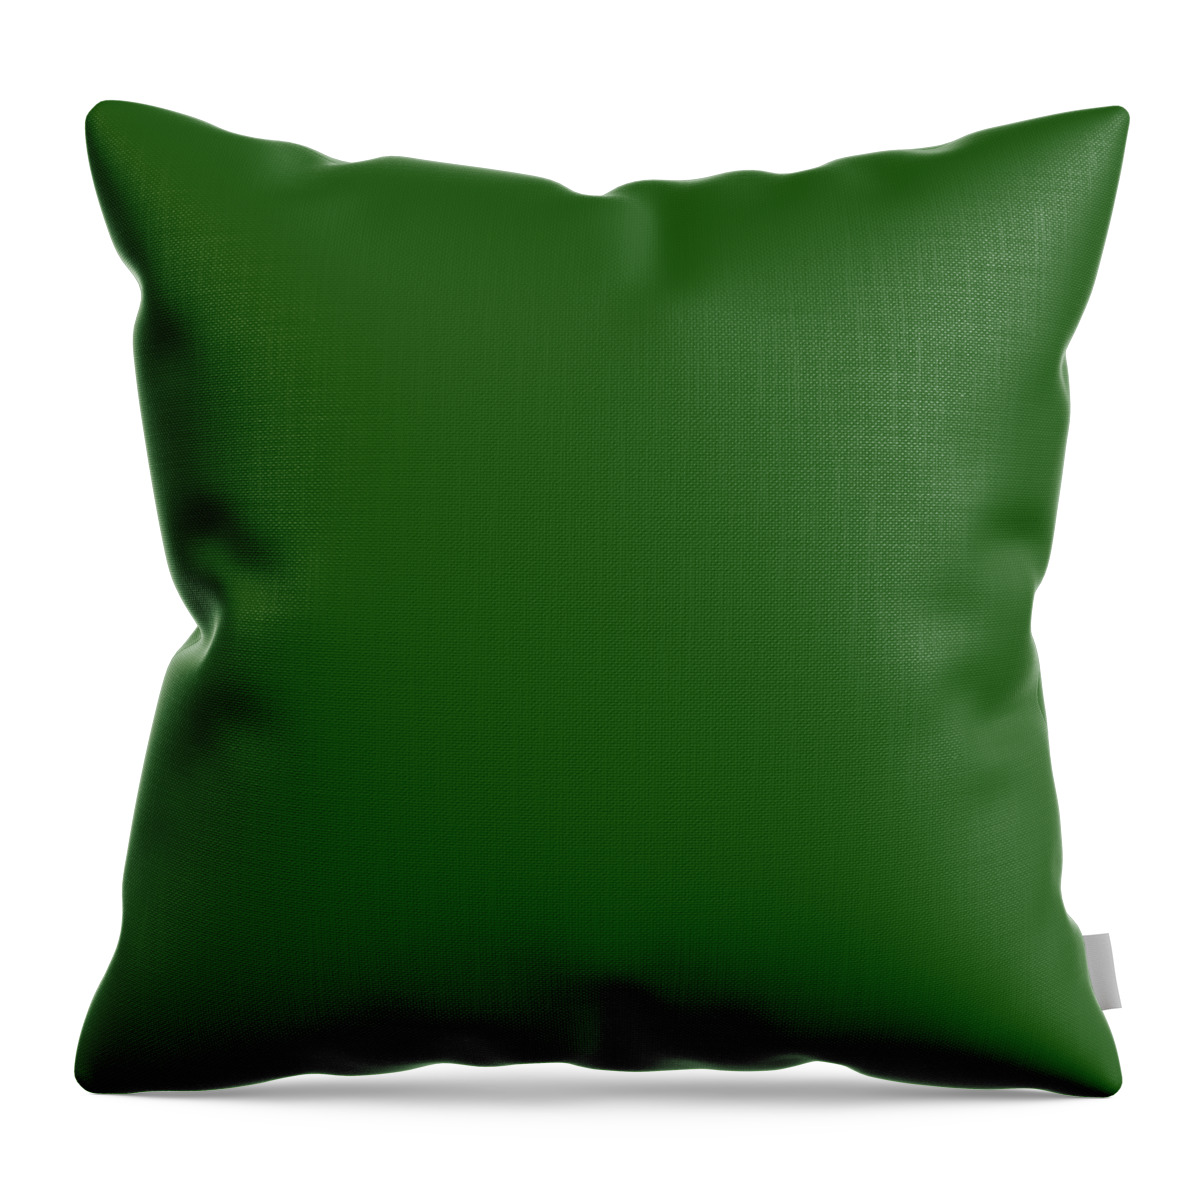 Solid Colors Throw Pillow featuring the digital art Solid Forest Green Color by Garaga Designs